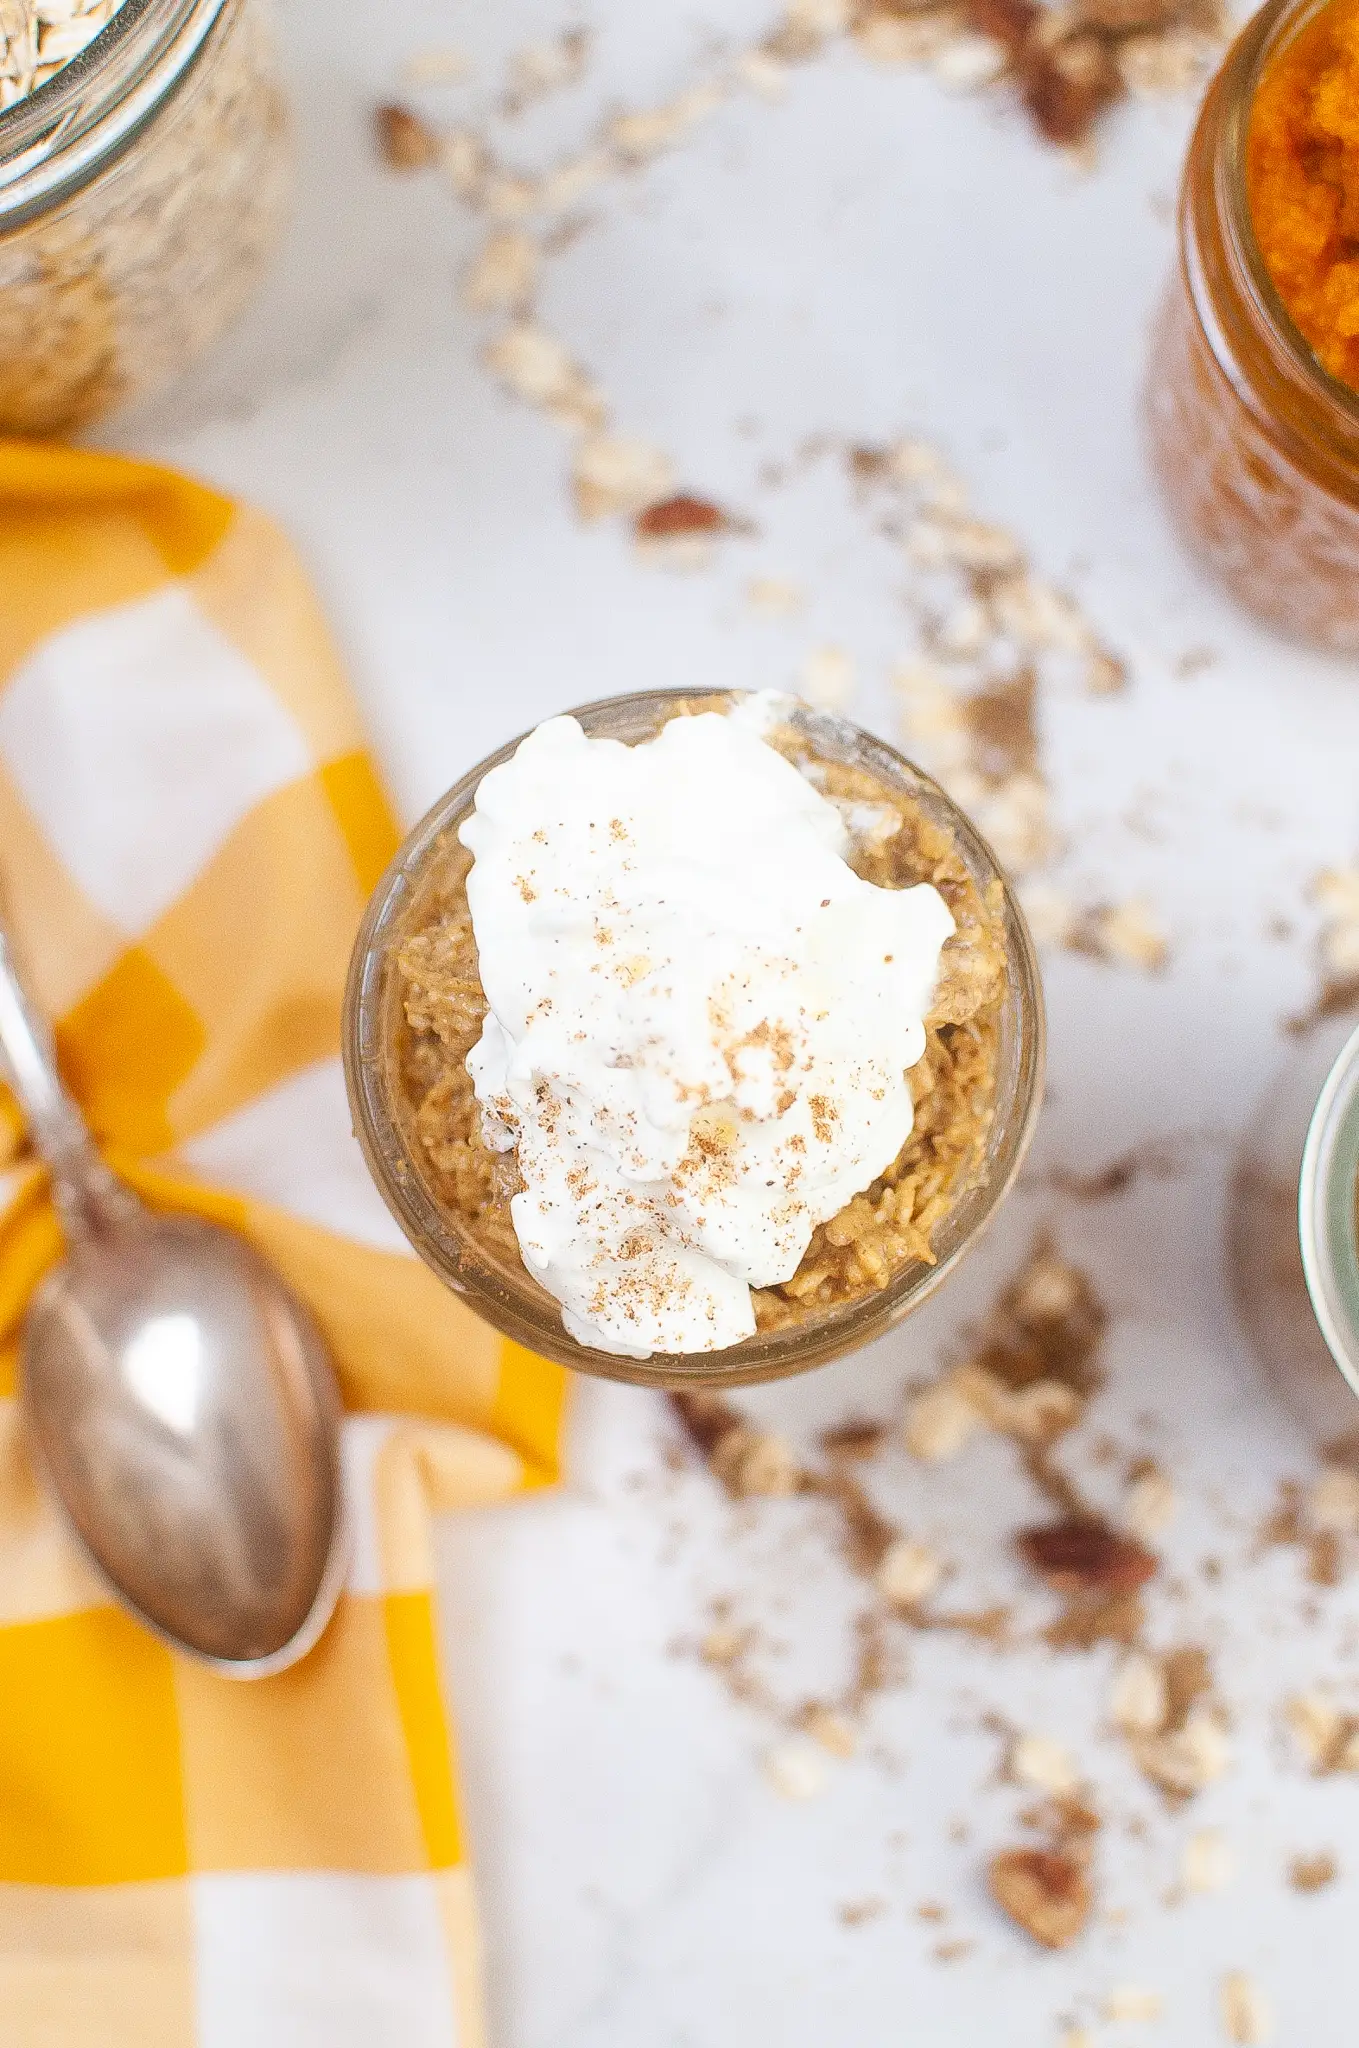 All of the ingredients in a jar, mixed up, topped with whipped cream.